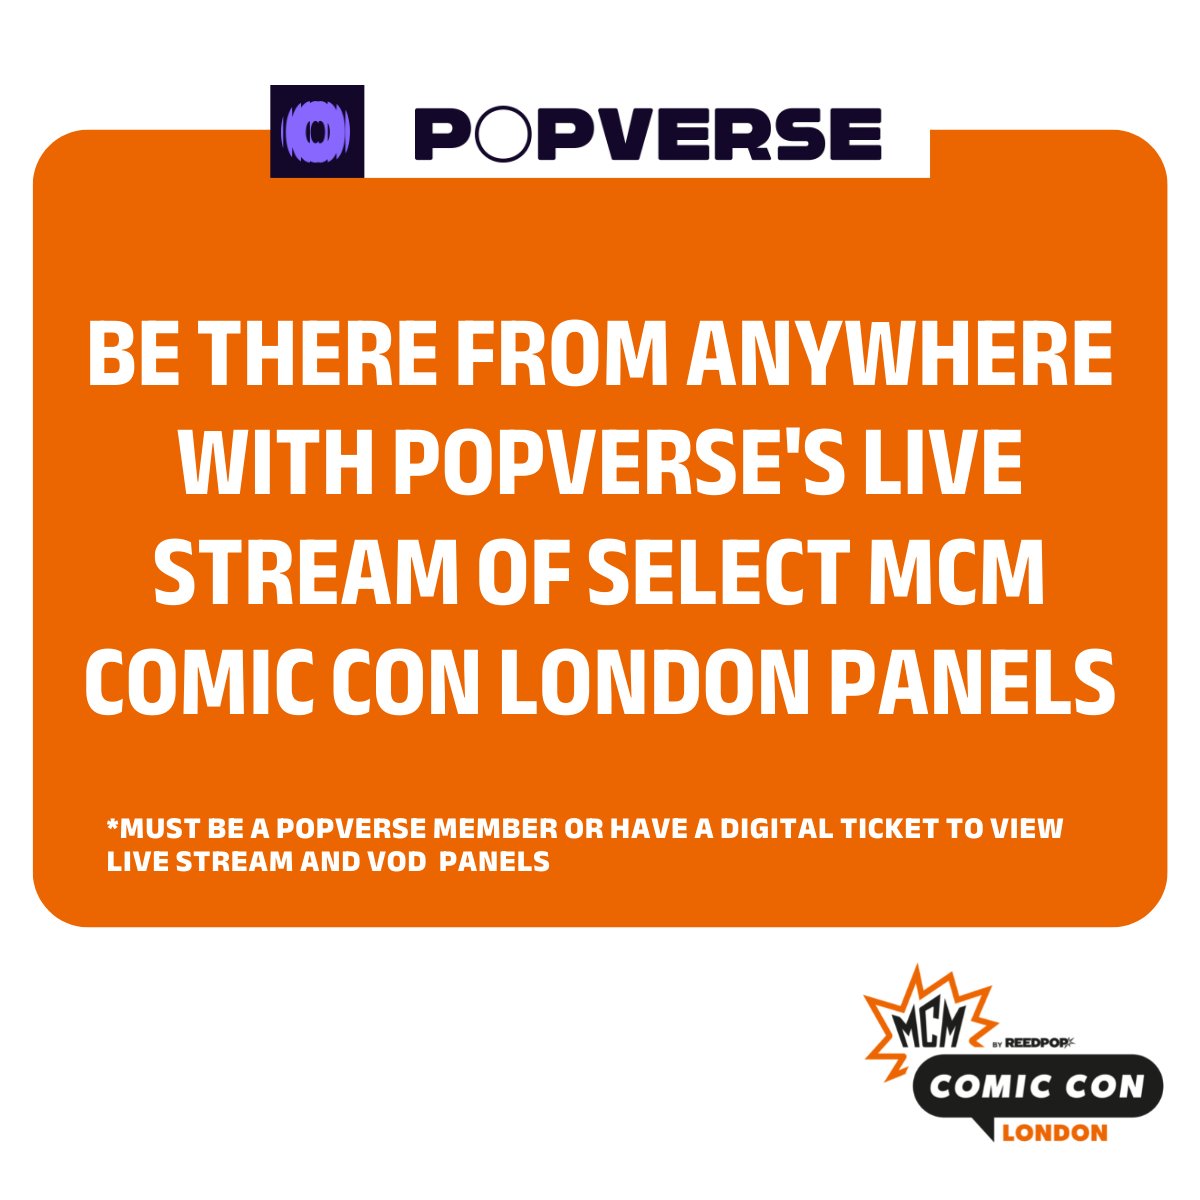 🧡 if you're going to @MCMComicCon London! Want to live stream our selection of MCM panels or watch on VOD? ✨Become a Popverse Member: bit.ly/3Qh6CZ8 ✨OR buy a Digital Ticket: bit.ly/3eKKgl6 👉Visit our MCM London Guide for more bit.ly/3TFq1nt